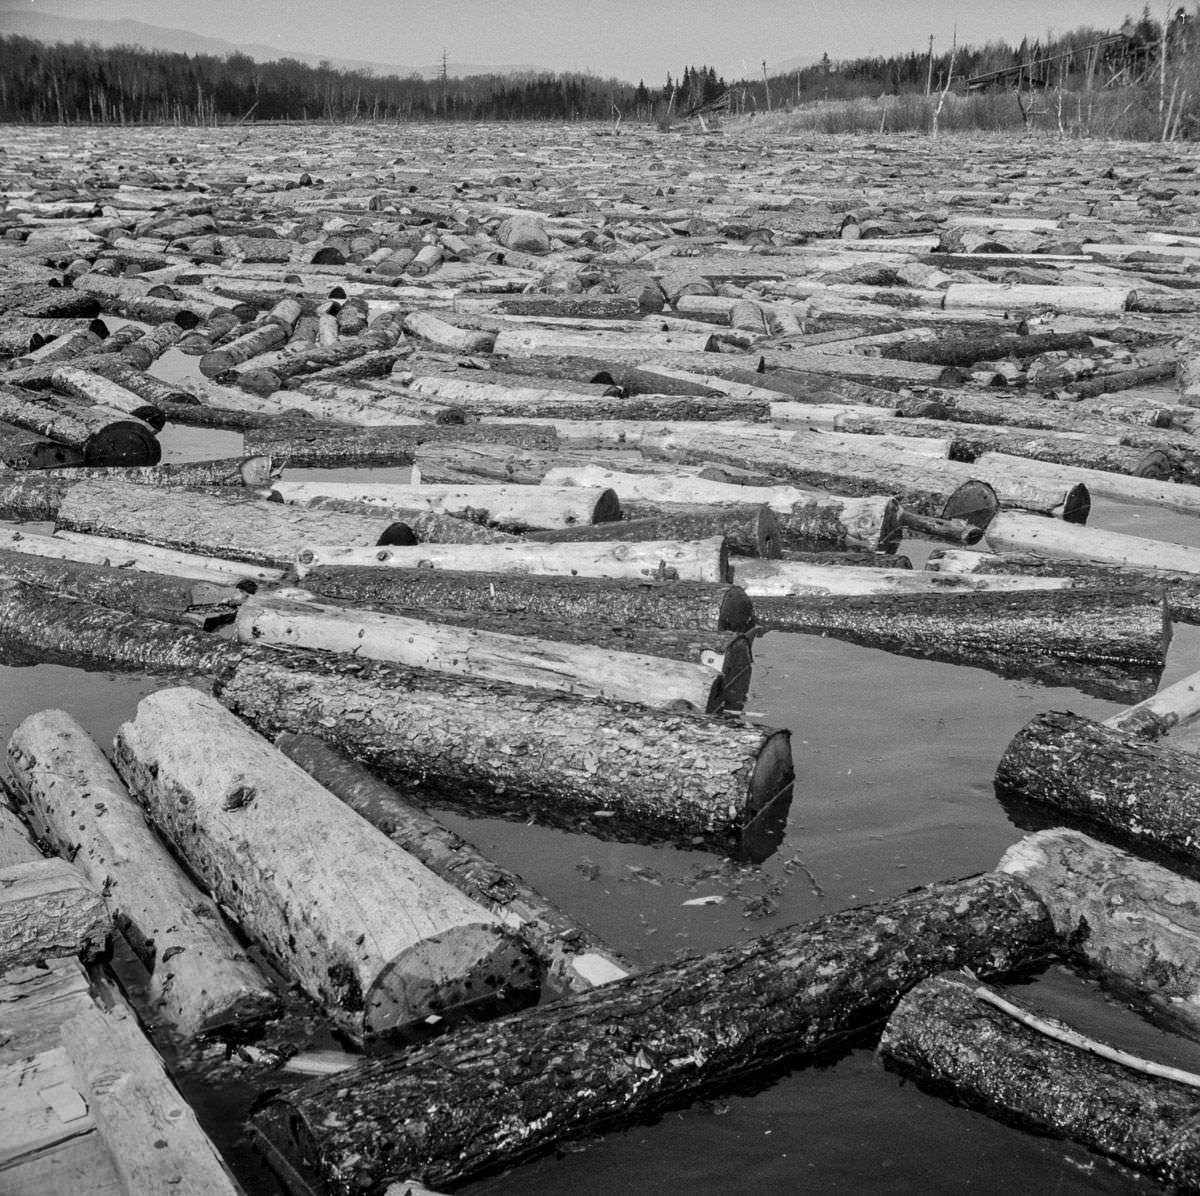 Pulpwood accumulated in the Kennebago River waiting to be sluiced through the power dam.